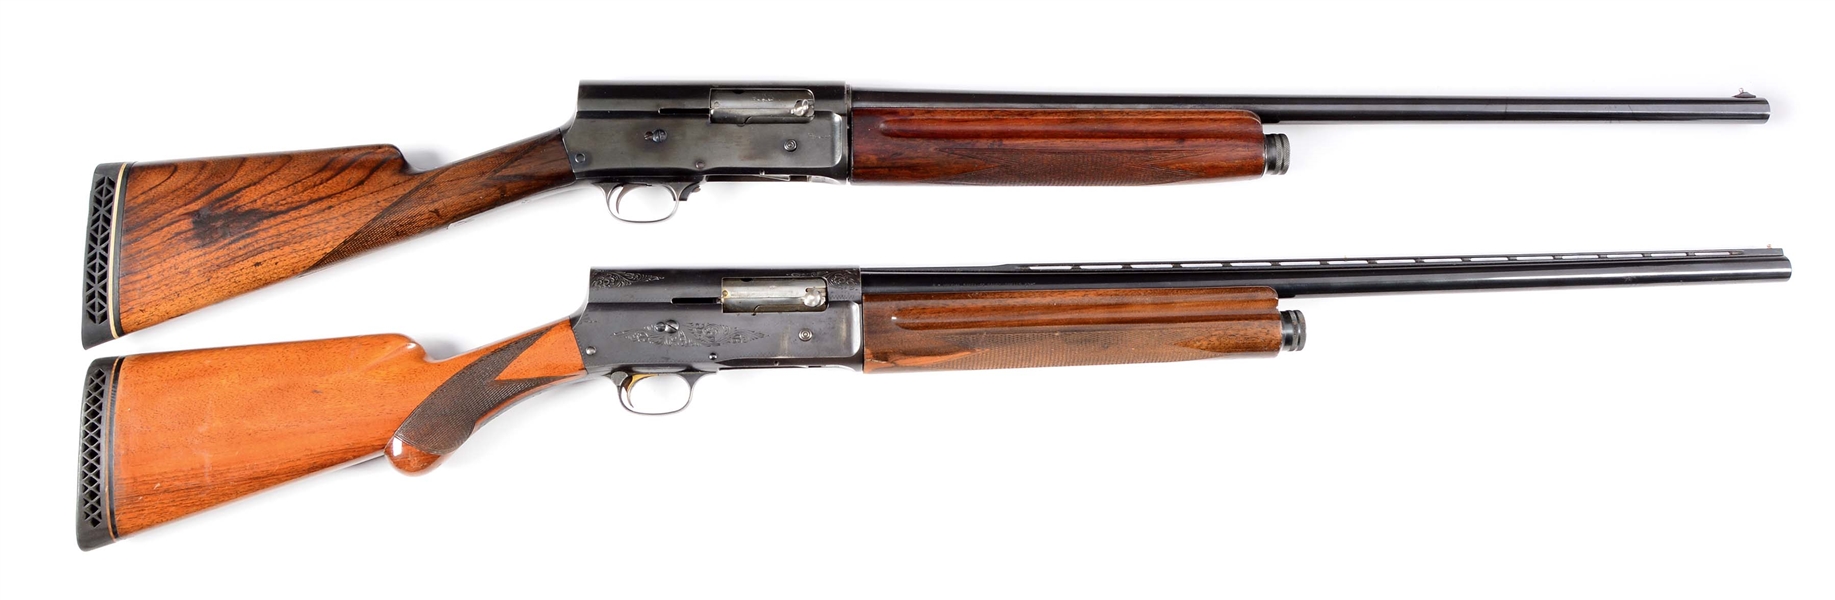 (C) LOT OF 2: FN AND BROWNING SEMI-AUTOMATIC SHOTGUNS.